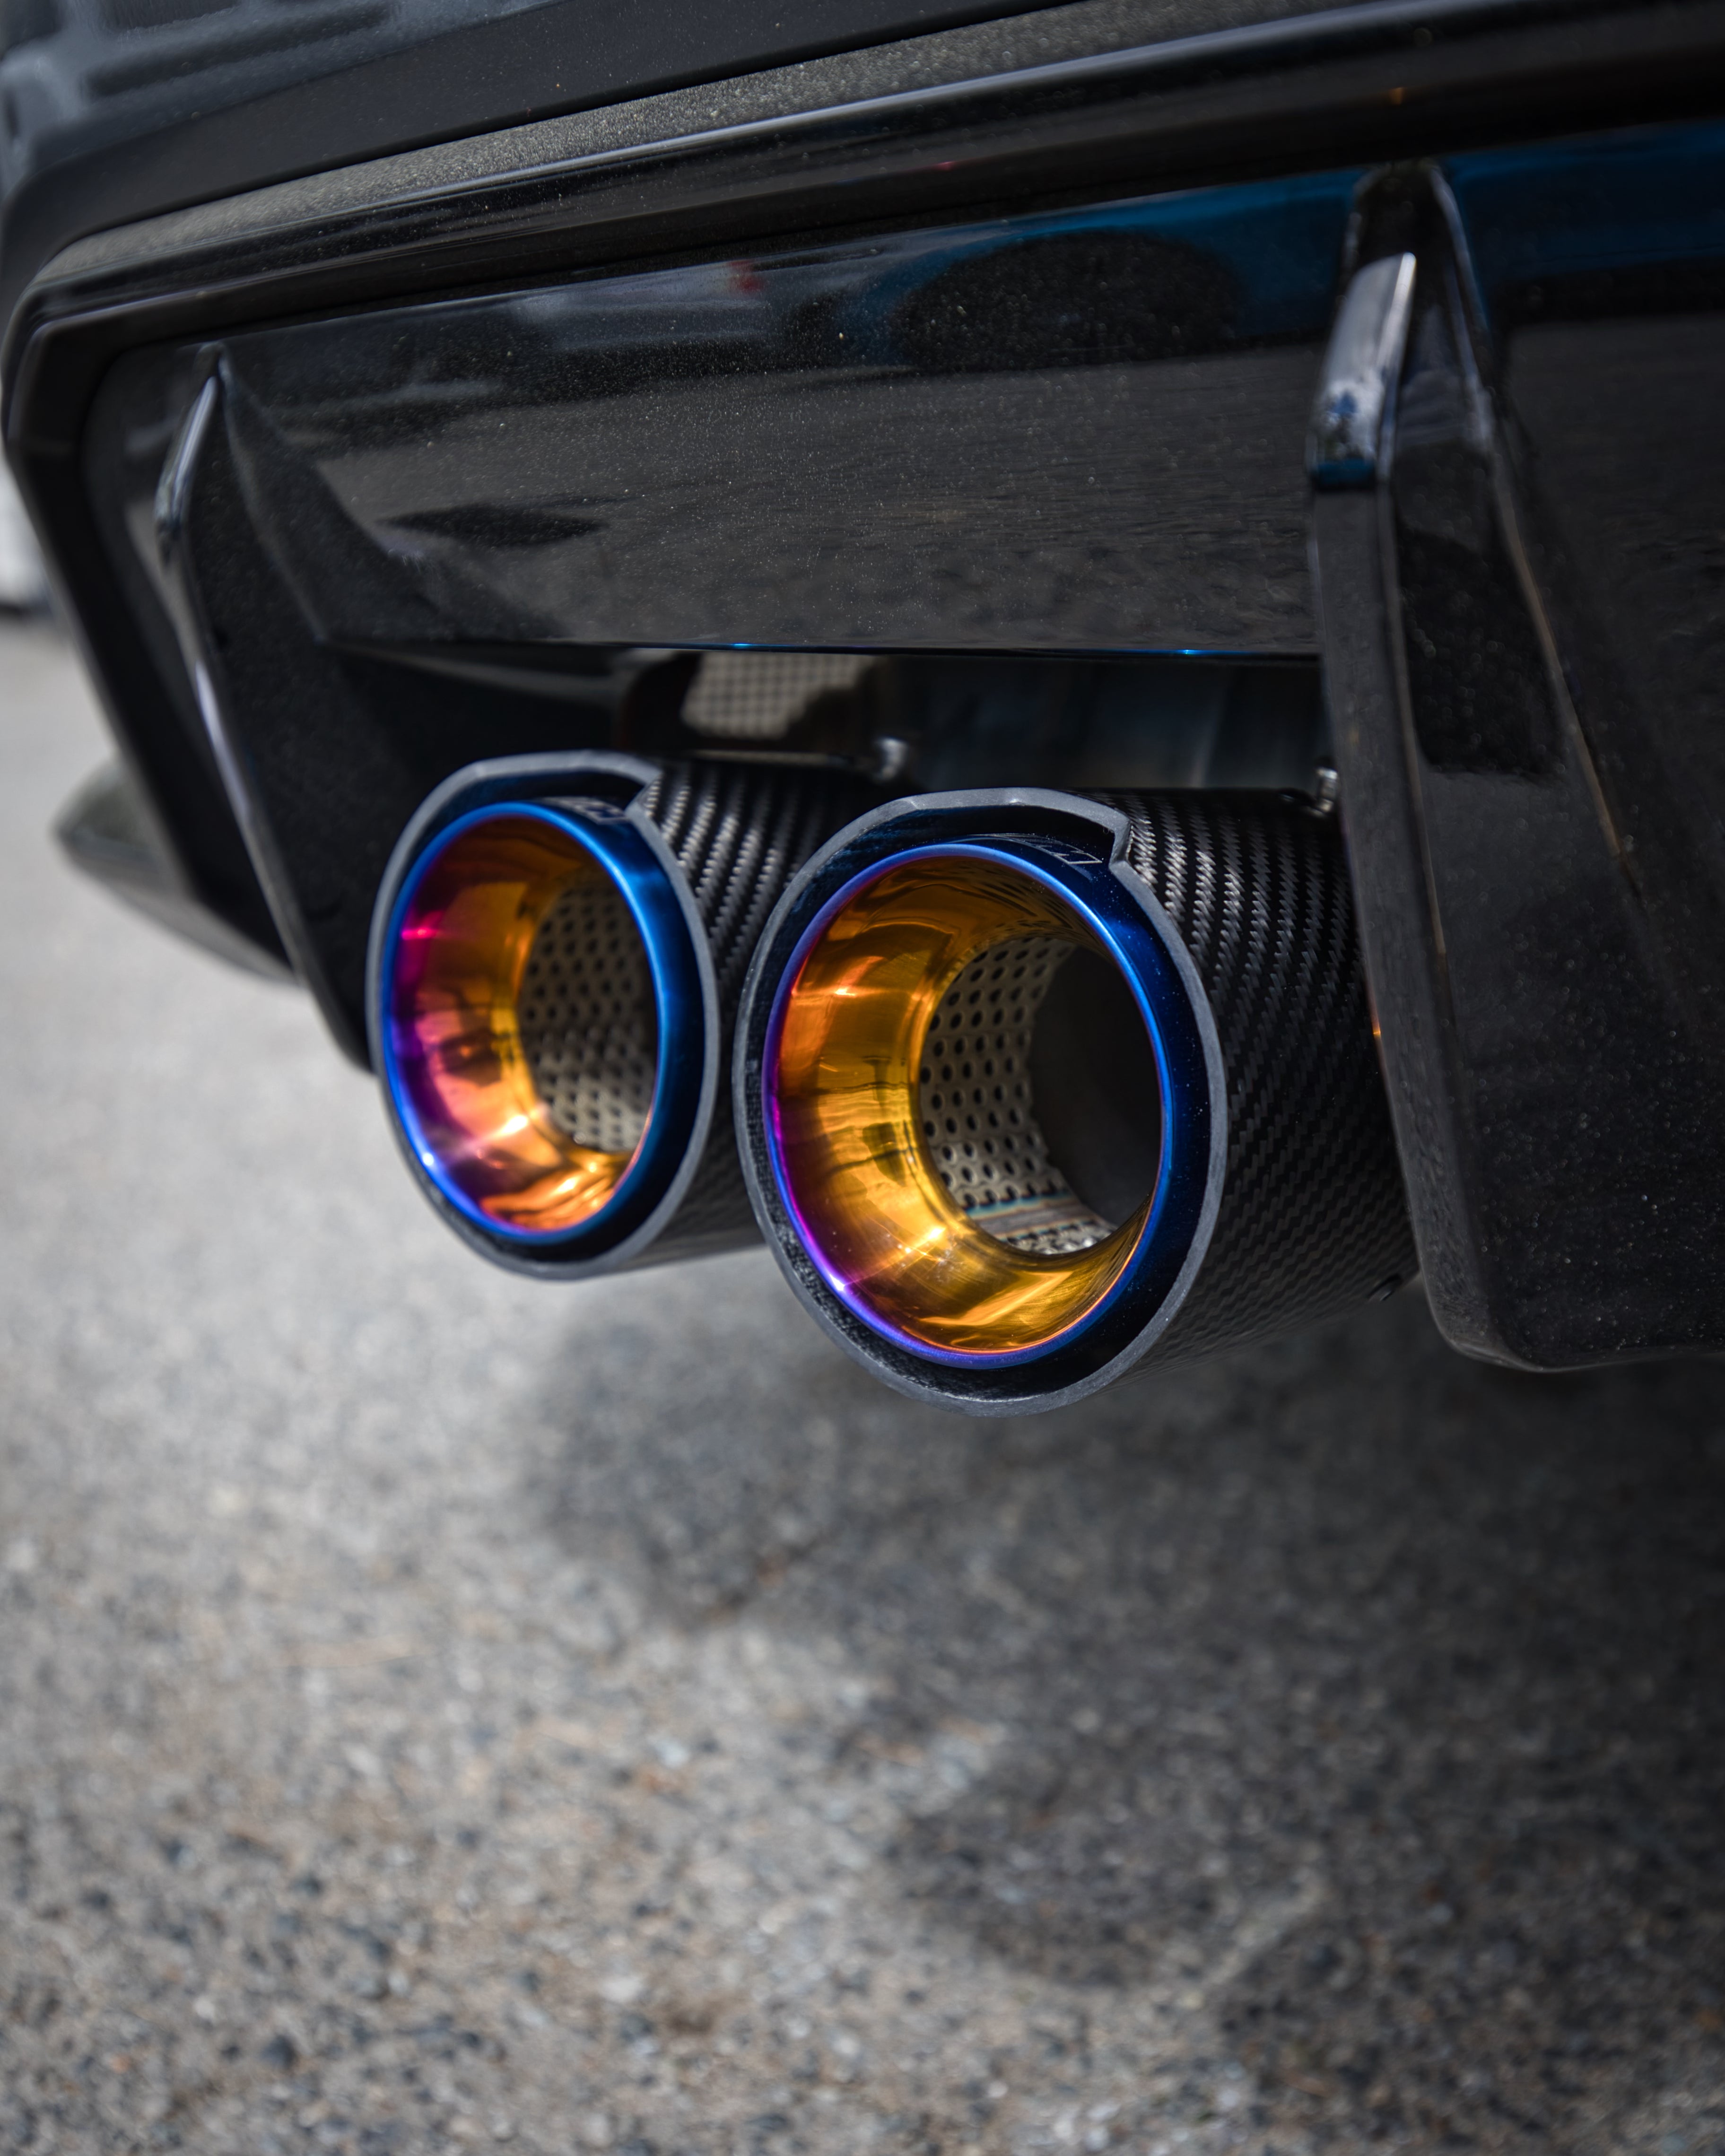 BMW M3/M4 G80/G82/G83 OEM M Performance Style Carbon Fibre Exhaust Tips - Manufactured from 2*2 Carbon Fibre Weave with 304 Stainless Steel. This product is coated in your choice of finishings to produce a stunning exhaust modification that is entirely reversible. With the large 105MM outlet, this product adds a more aggressive look to the rear end of your M3/M4 BMW. 